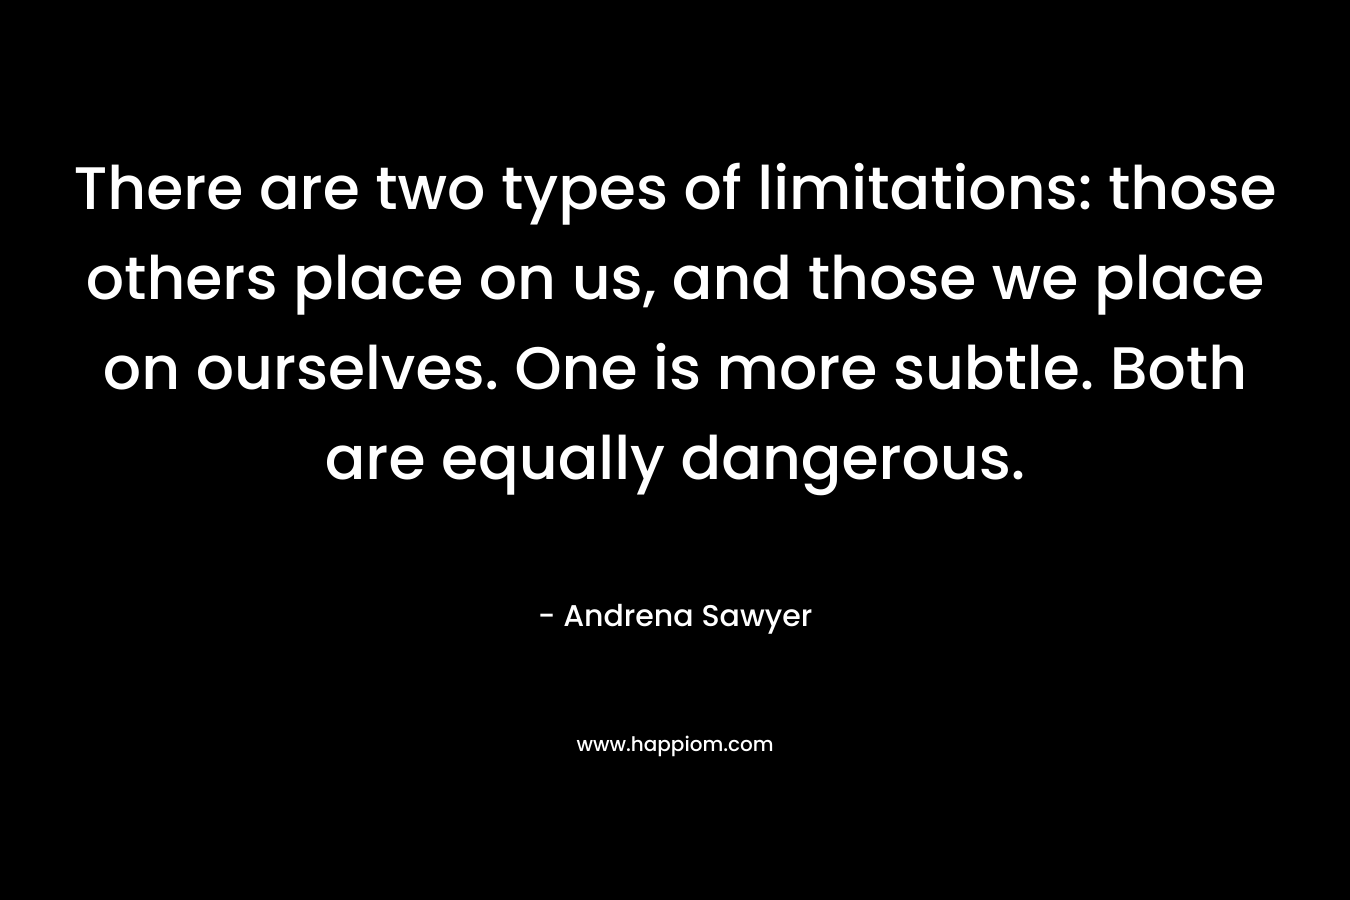 There are two types of limitations: those others place on us, and those we place on ourselves. One is more subtle. Both are equally dangerous. – Andrena Sawyer